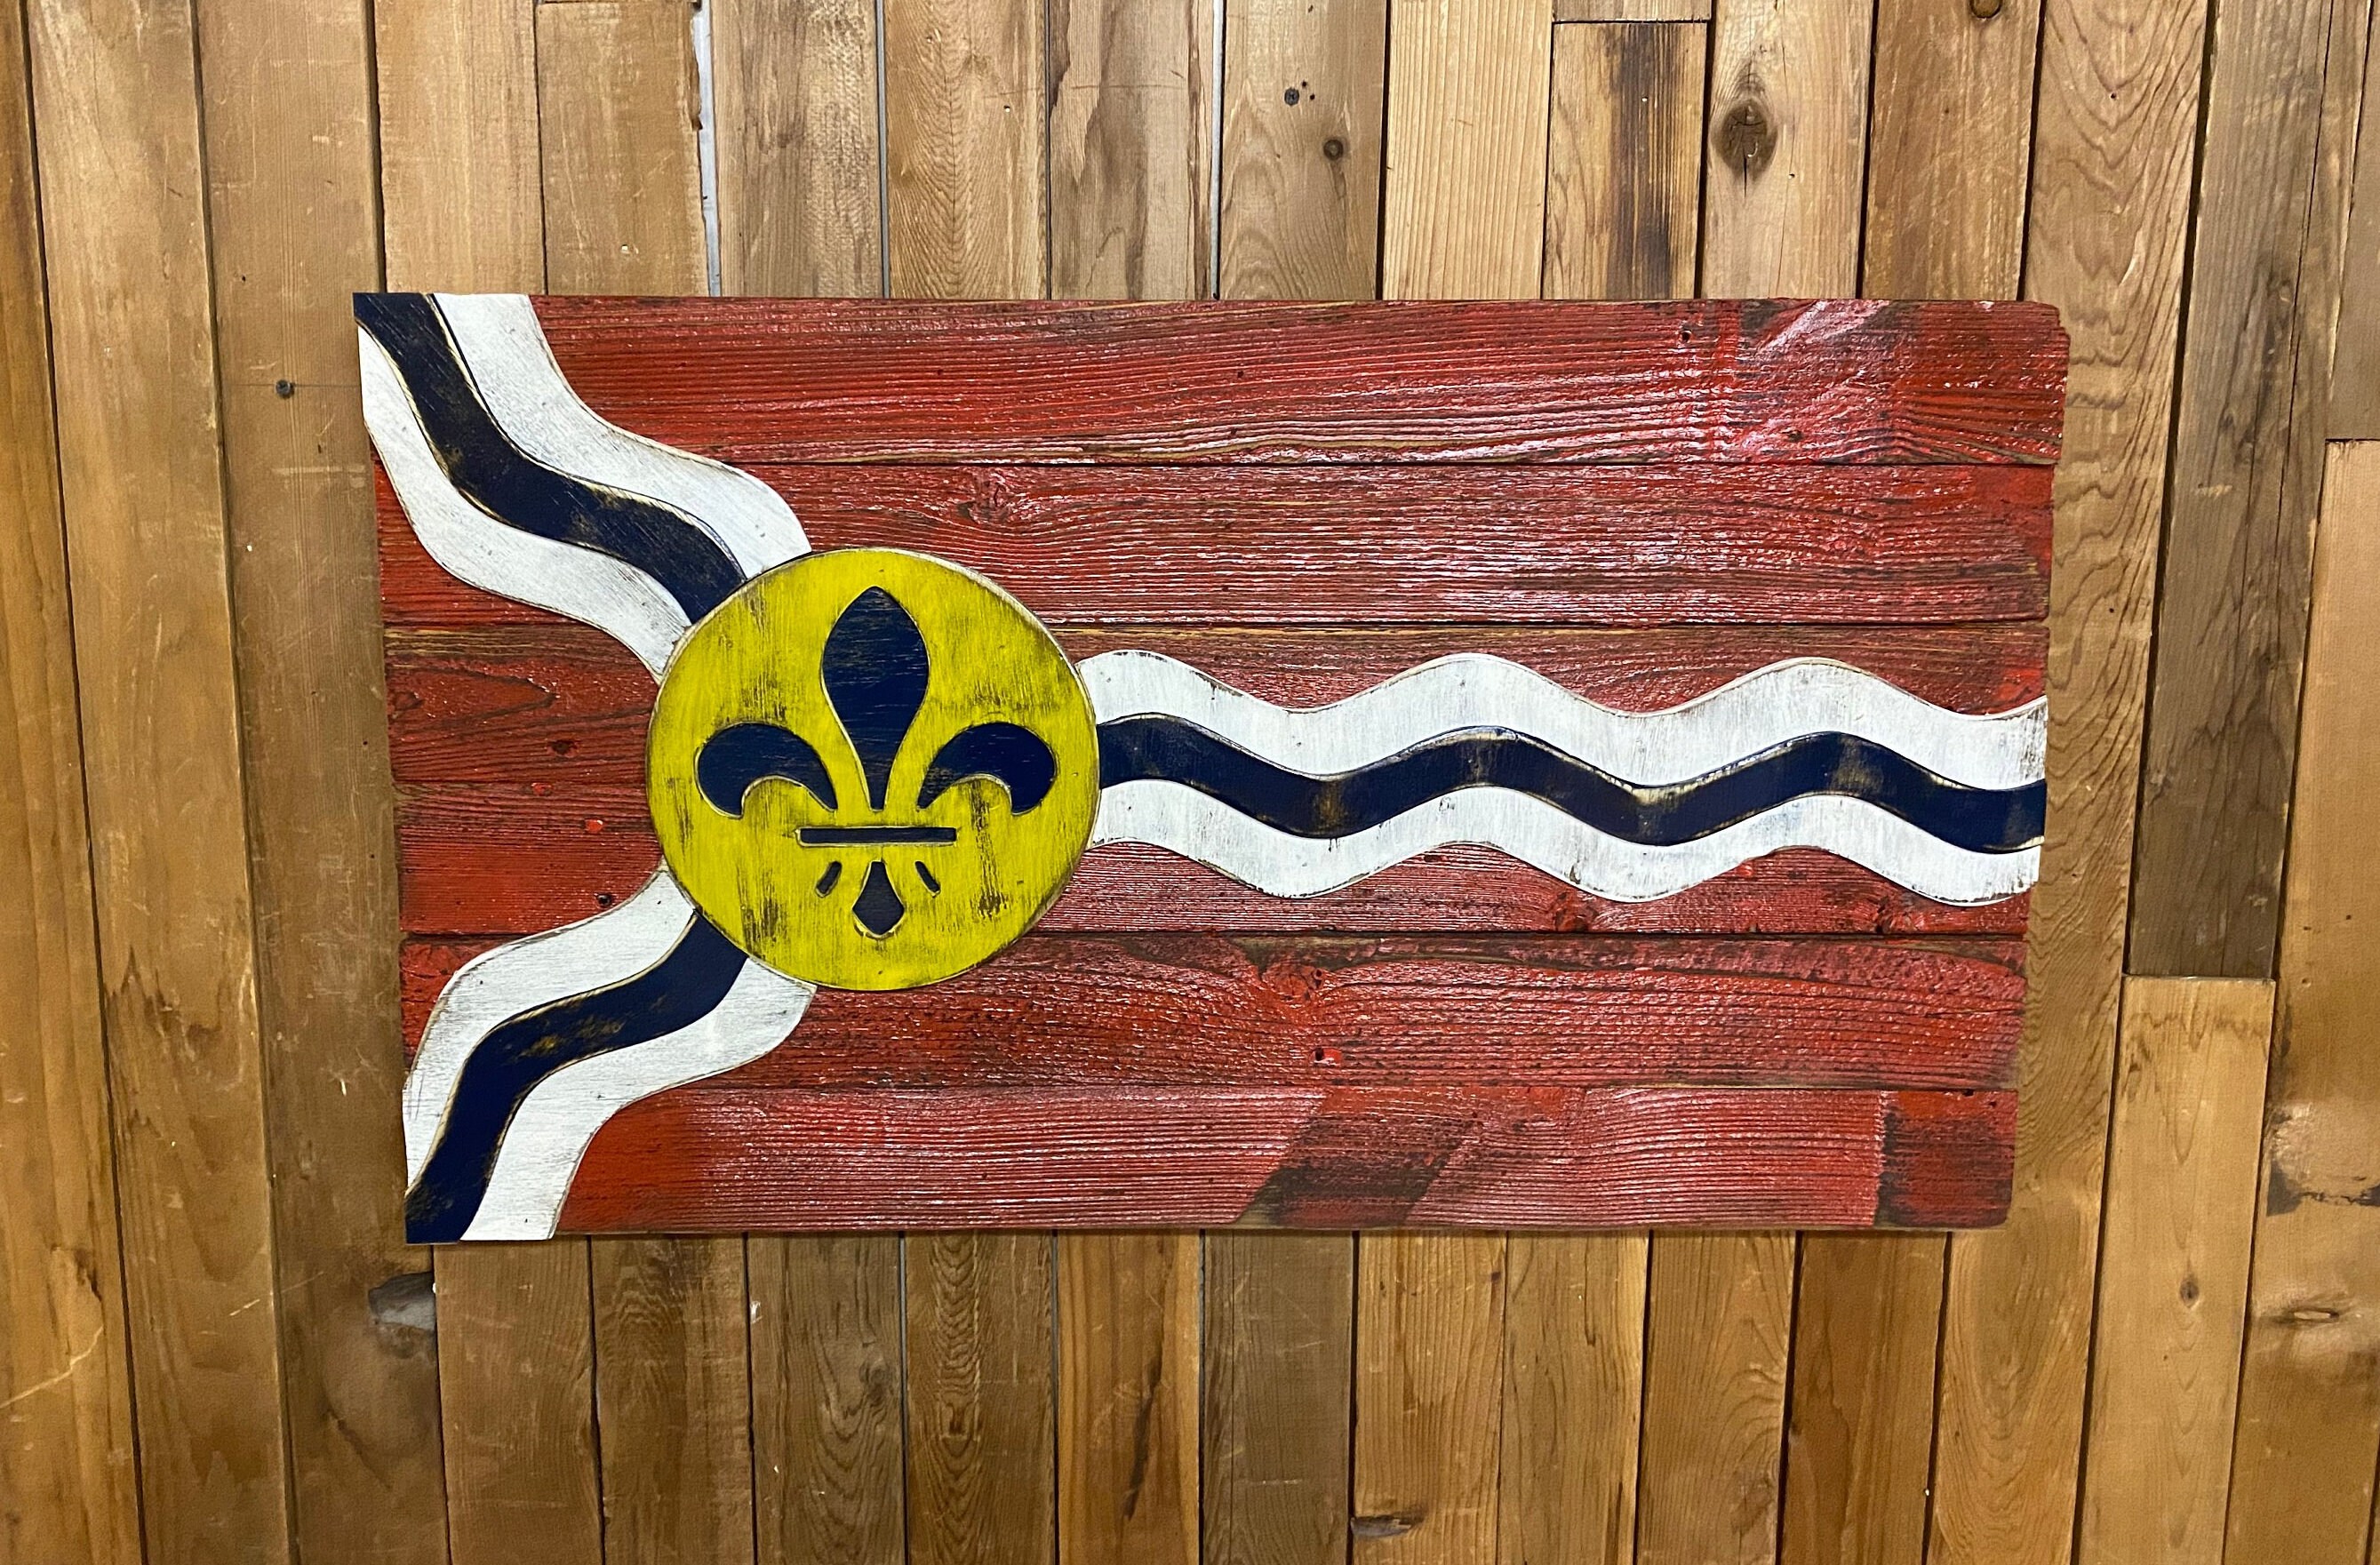 Weathered Wood One of a kind Saint Louis flag, Wooden, vintage, art,  distressed, Missouri, recycled, Red. wedding, home decor, St. Louis